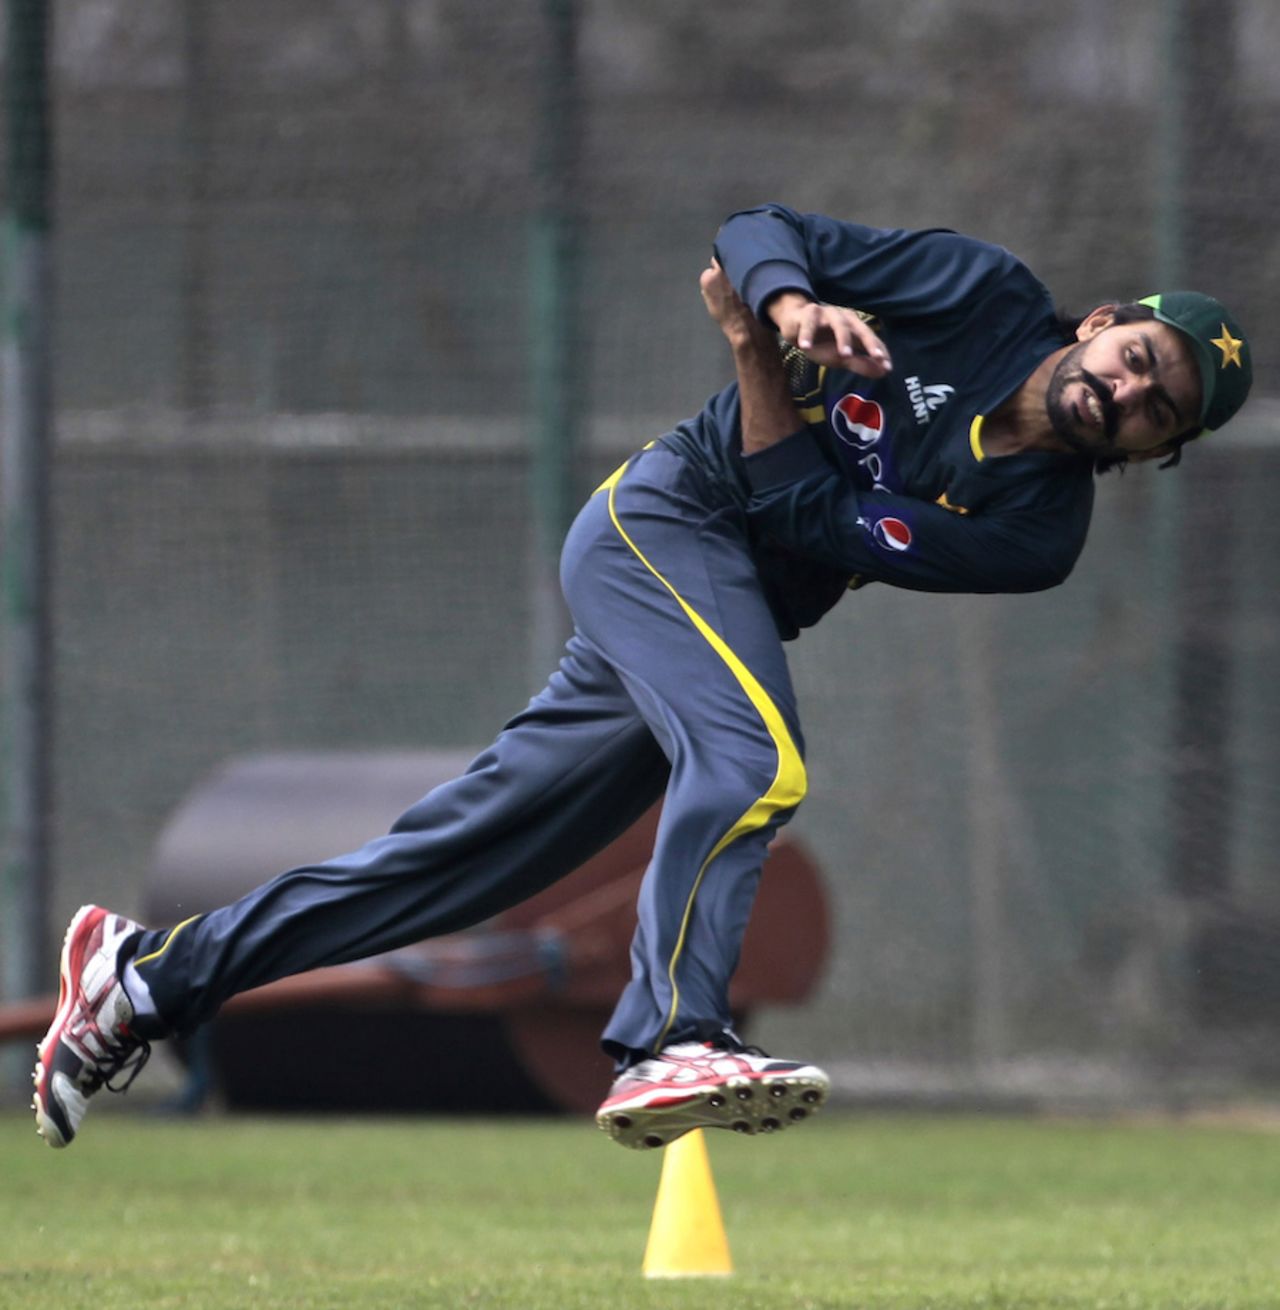 Fawad Alam throws a ball during practice, Dhaka, February 23, 2014